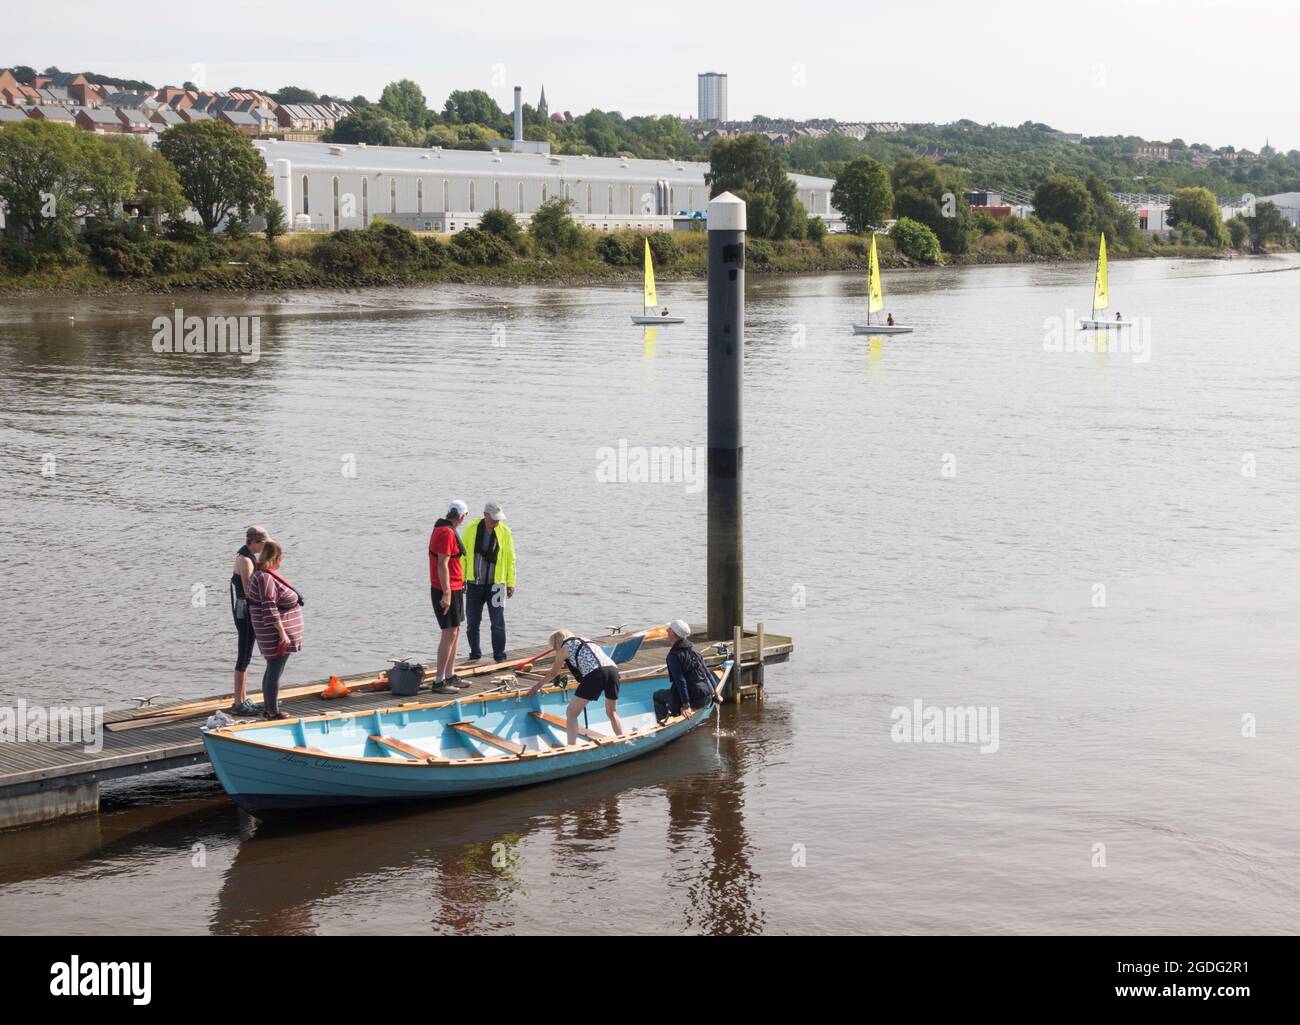 People learning how to sail on the river Tyne at Derwenthaugh Boat Station, near Newcastle, England, UK Stock Photo